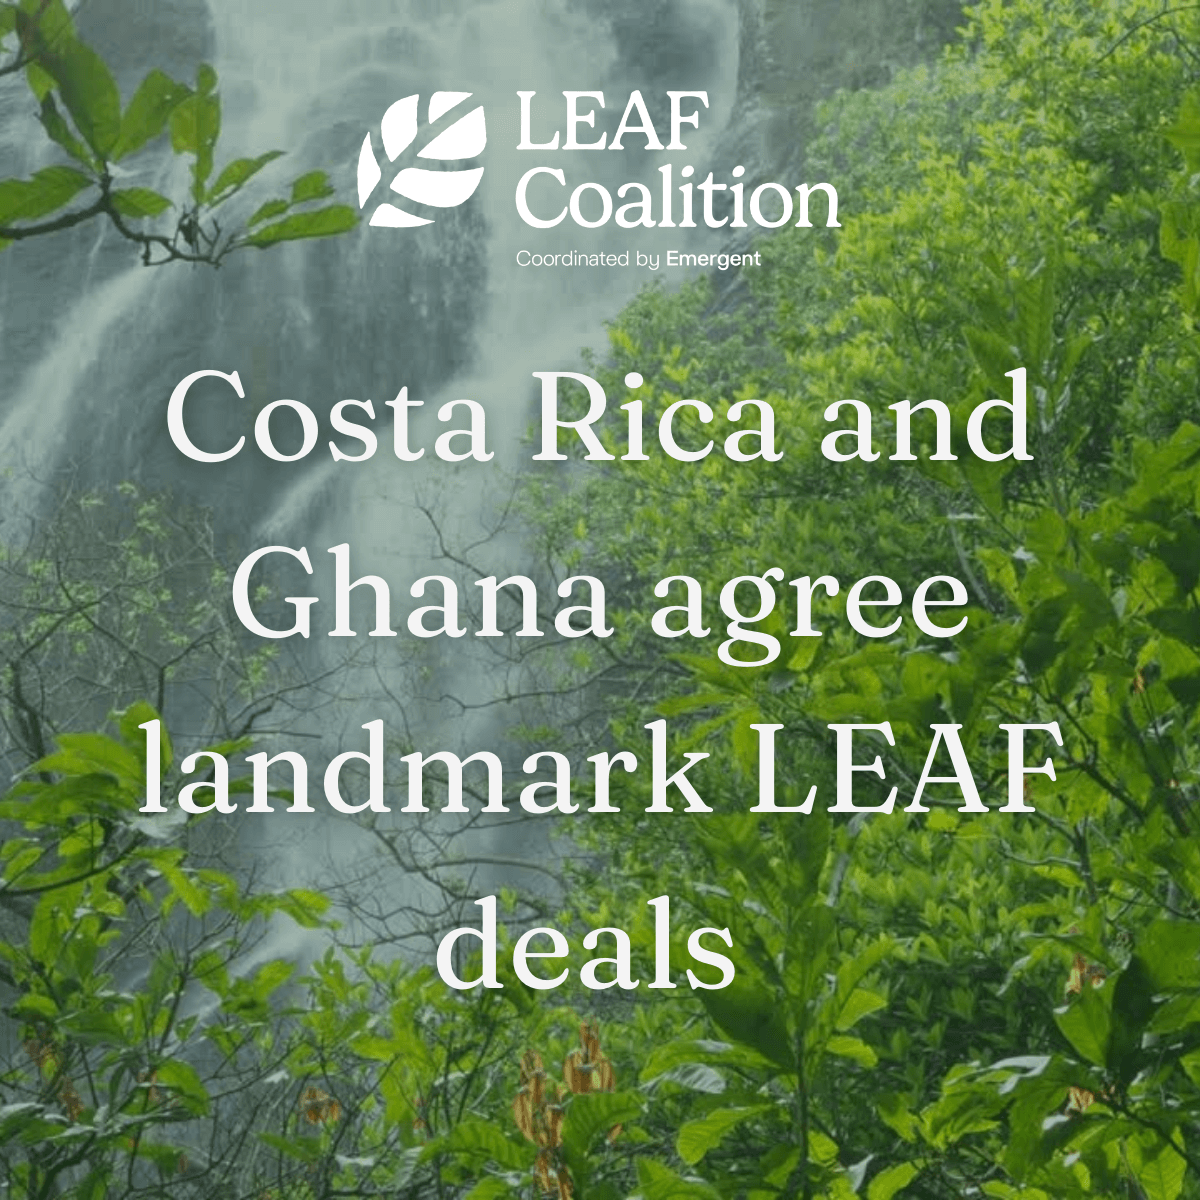 Costa Rica and Ghana Agree Landmark Deals to Supply Forest Carbon Credits to LEAF Coalition Buyers